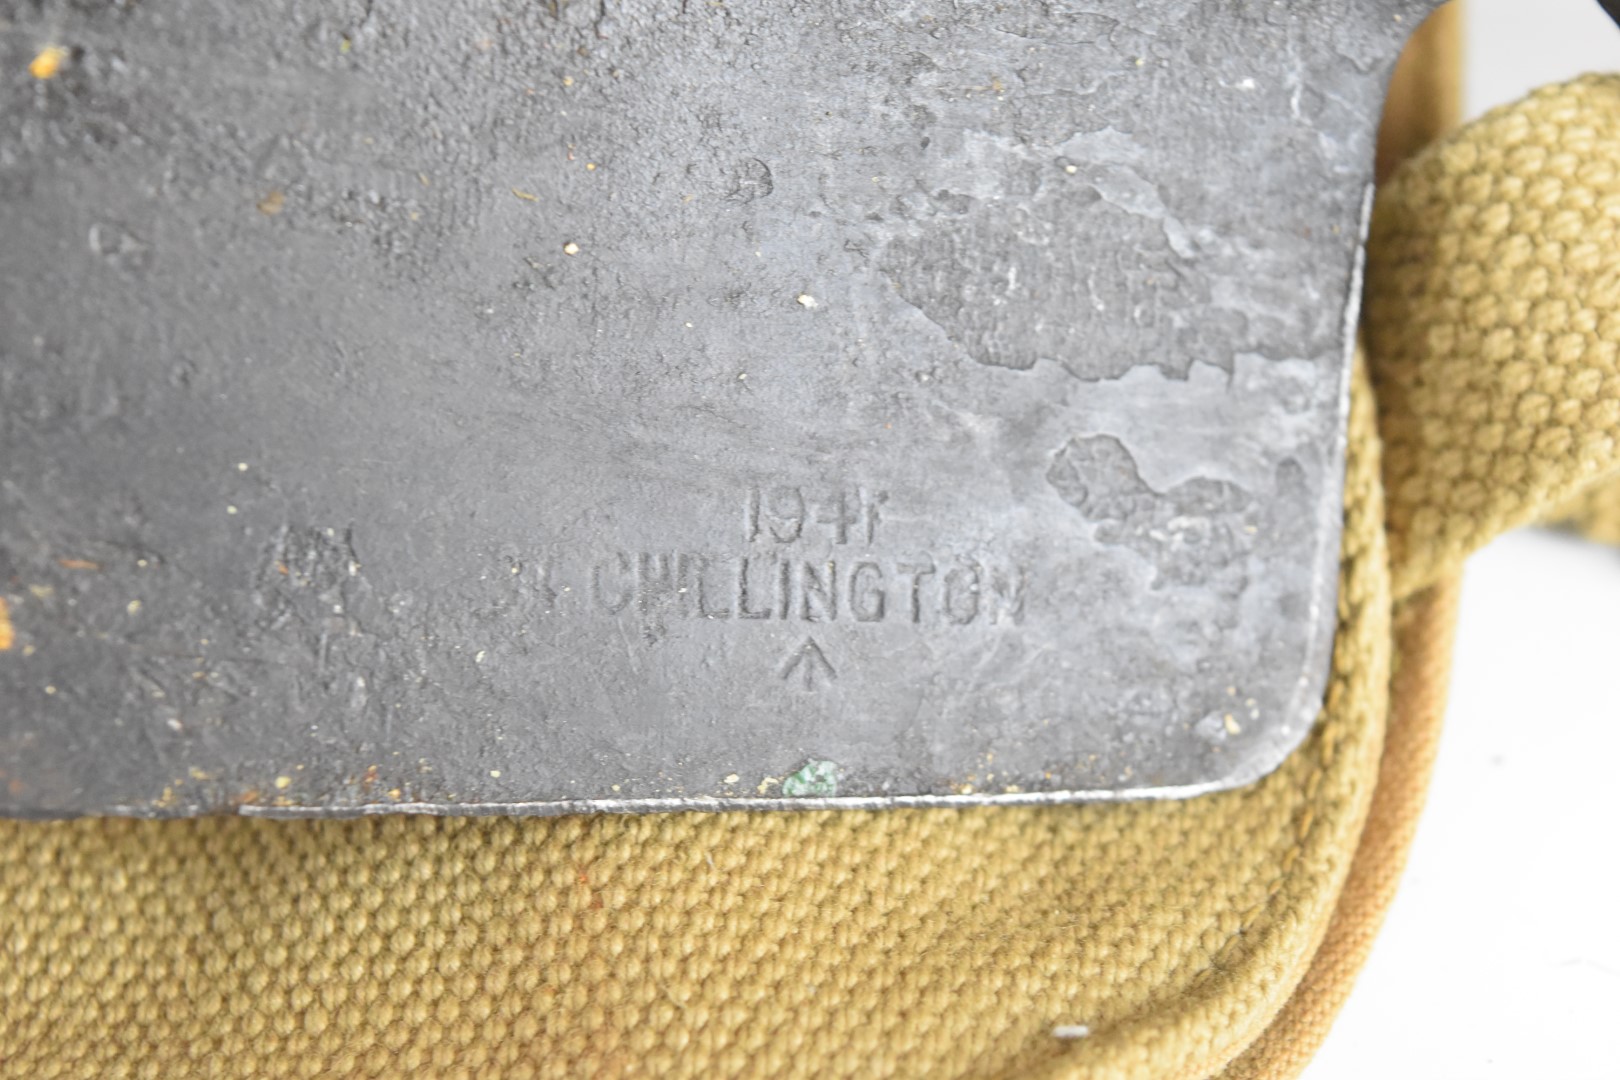 British WW2 entrenching tool dated 1941 with Chillington and broad arrow mark and cover dated 1943 - Image 5 of 5